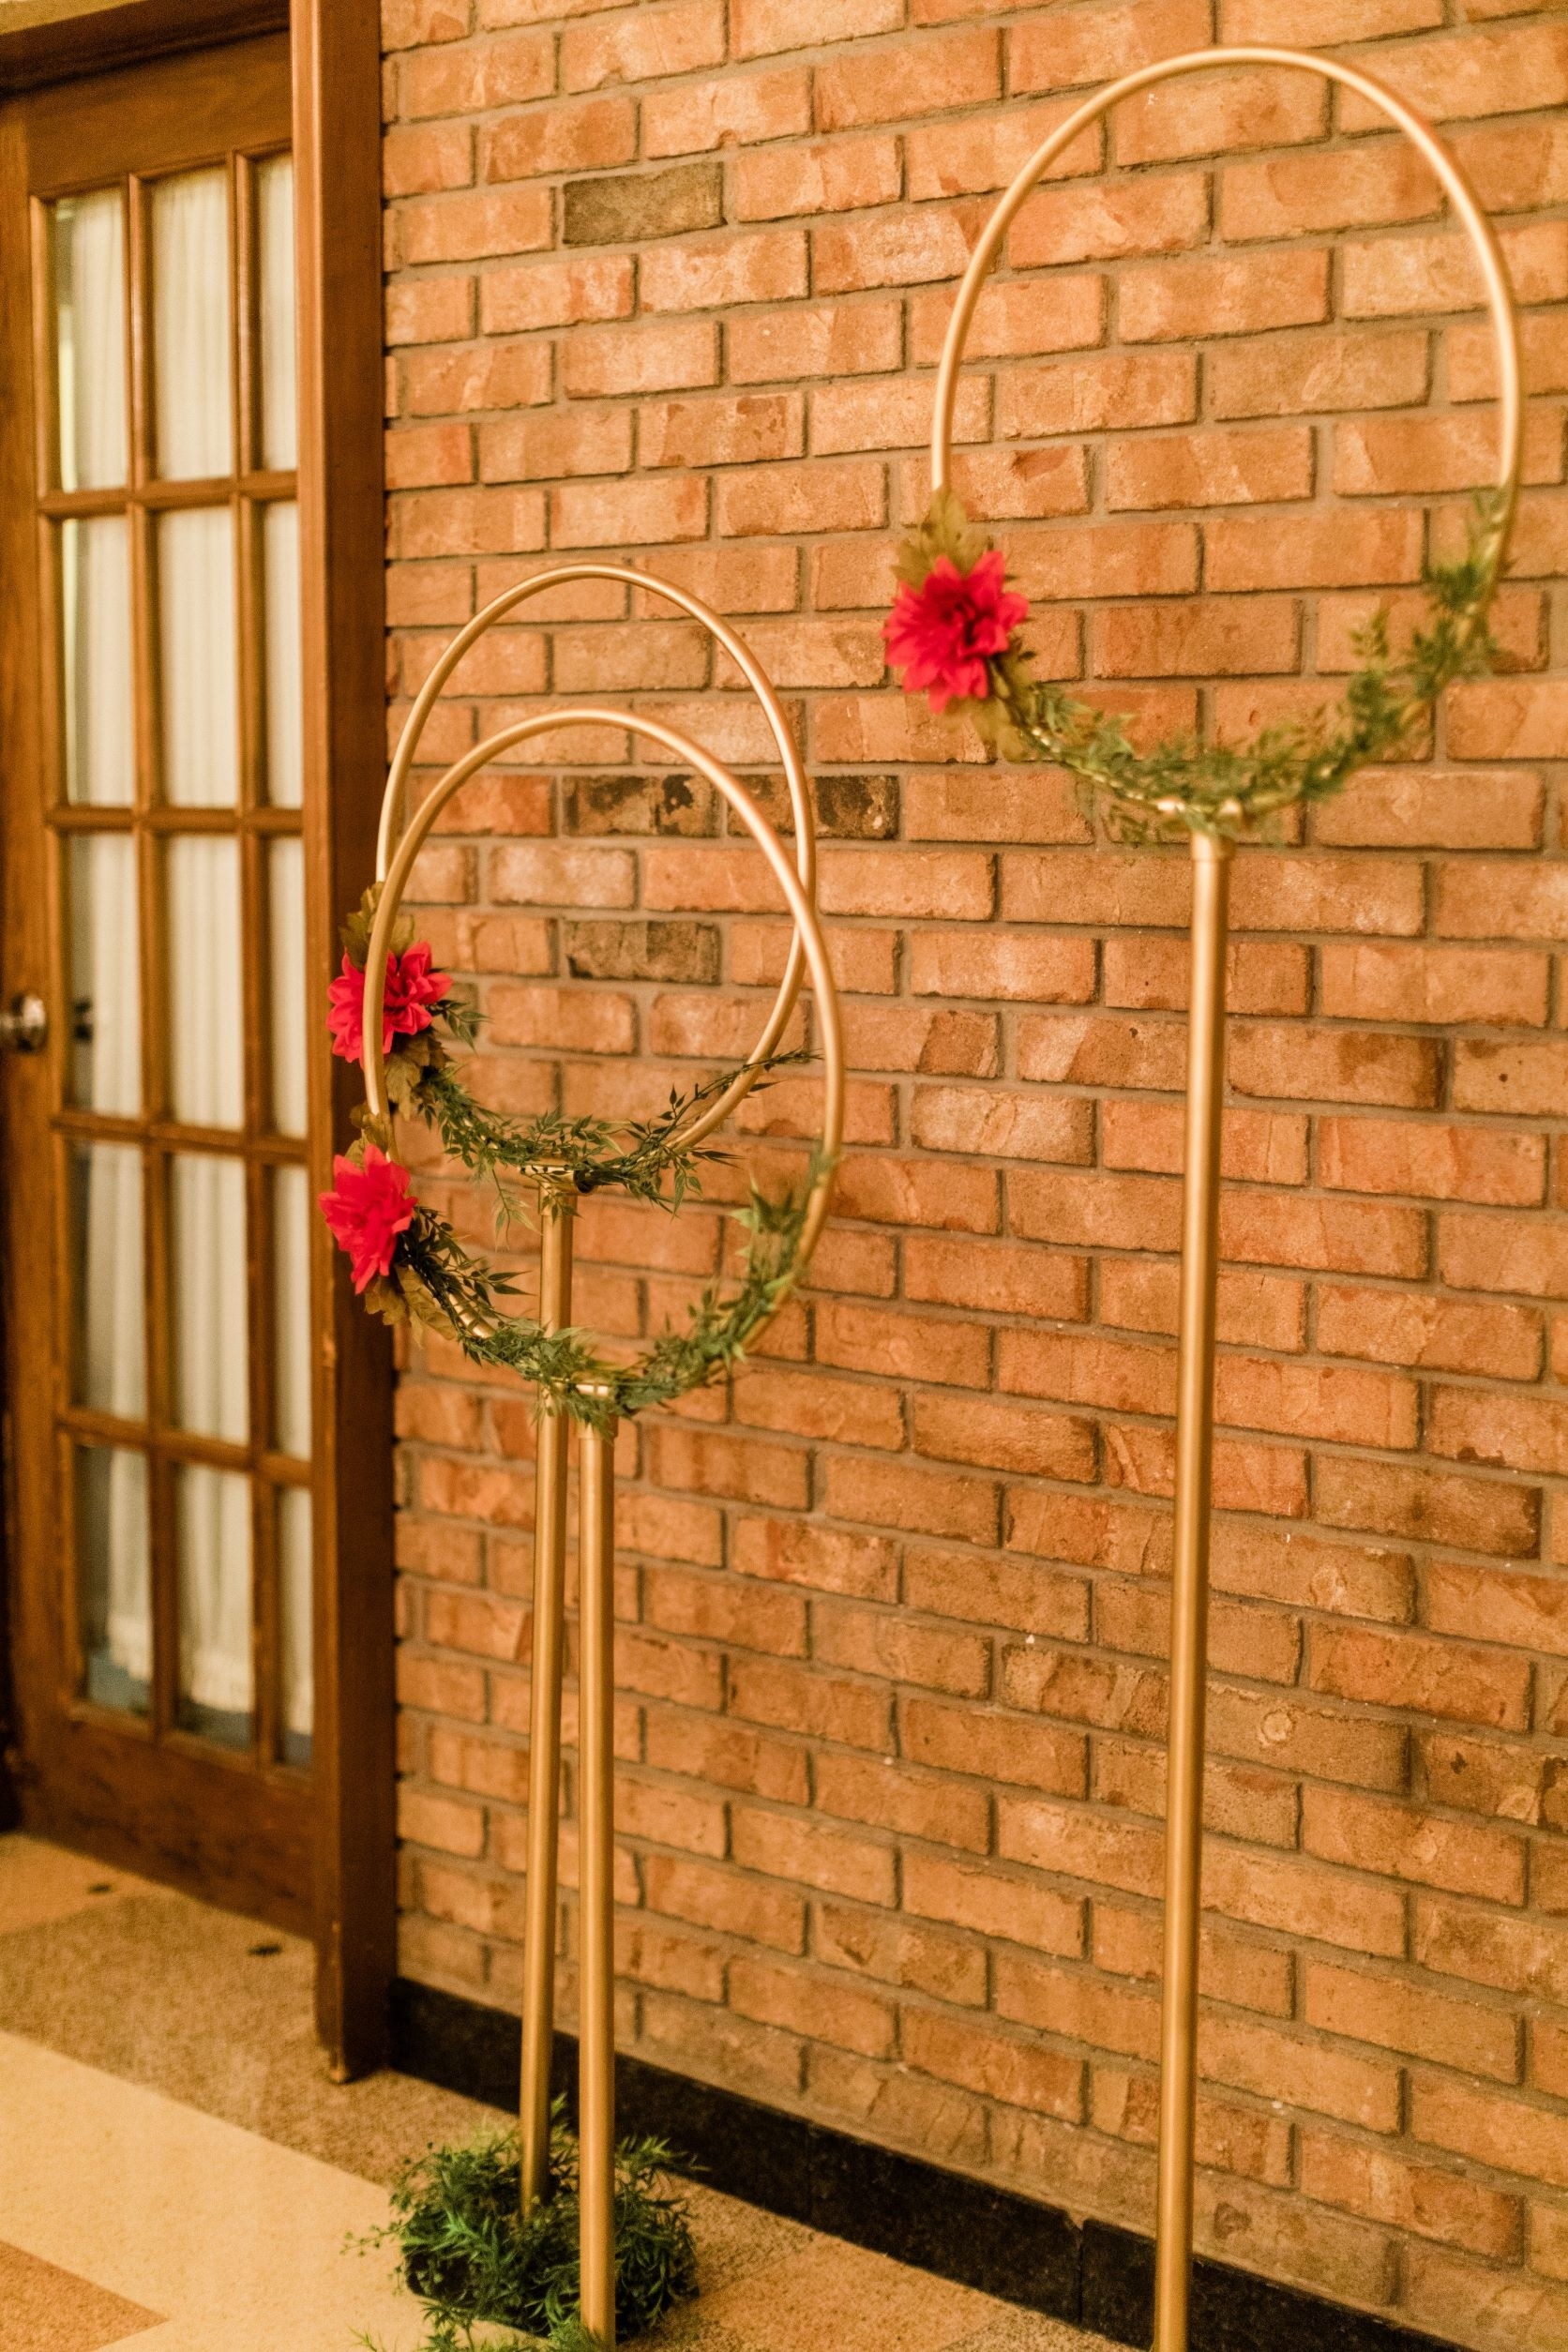 Three gold rods with hoops attached to the top. On the hoops are red flowers and greenery